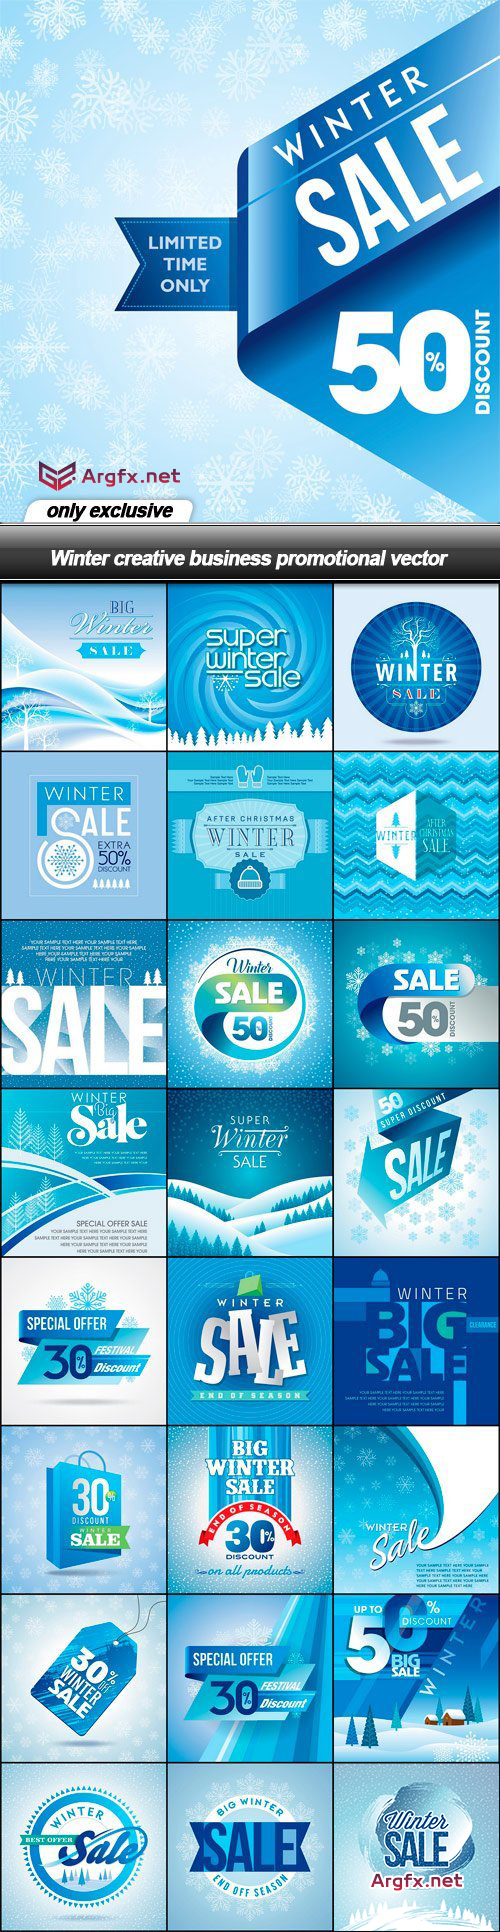 Winter creative business promotional vector - 25 EPS